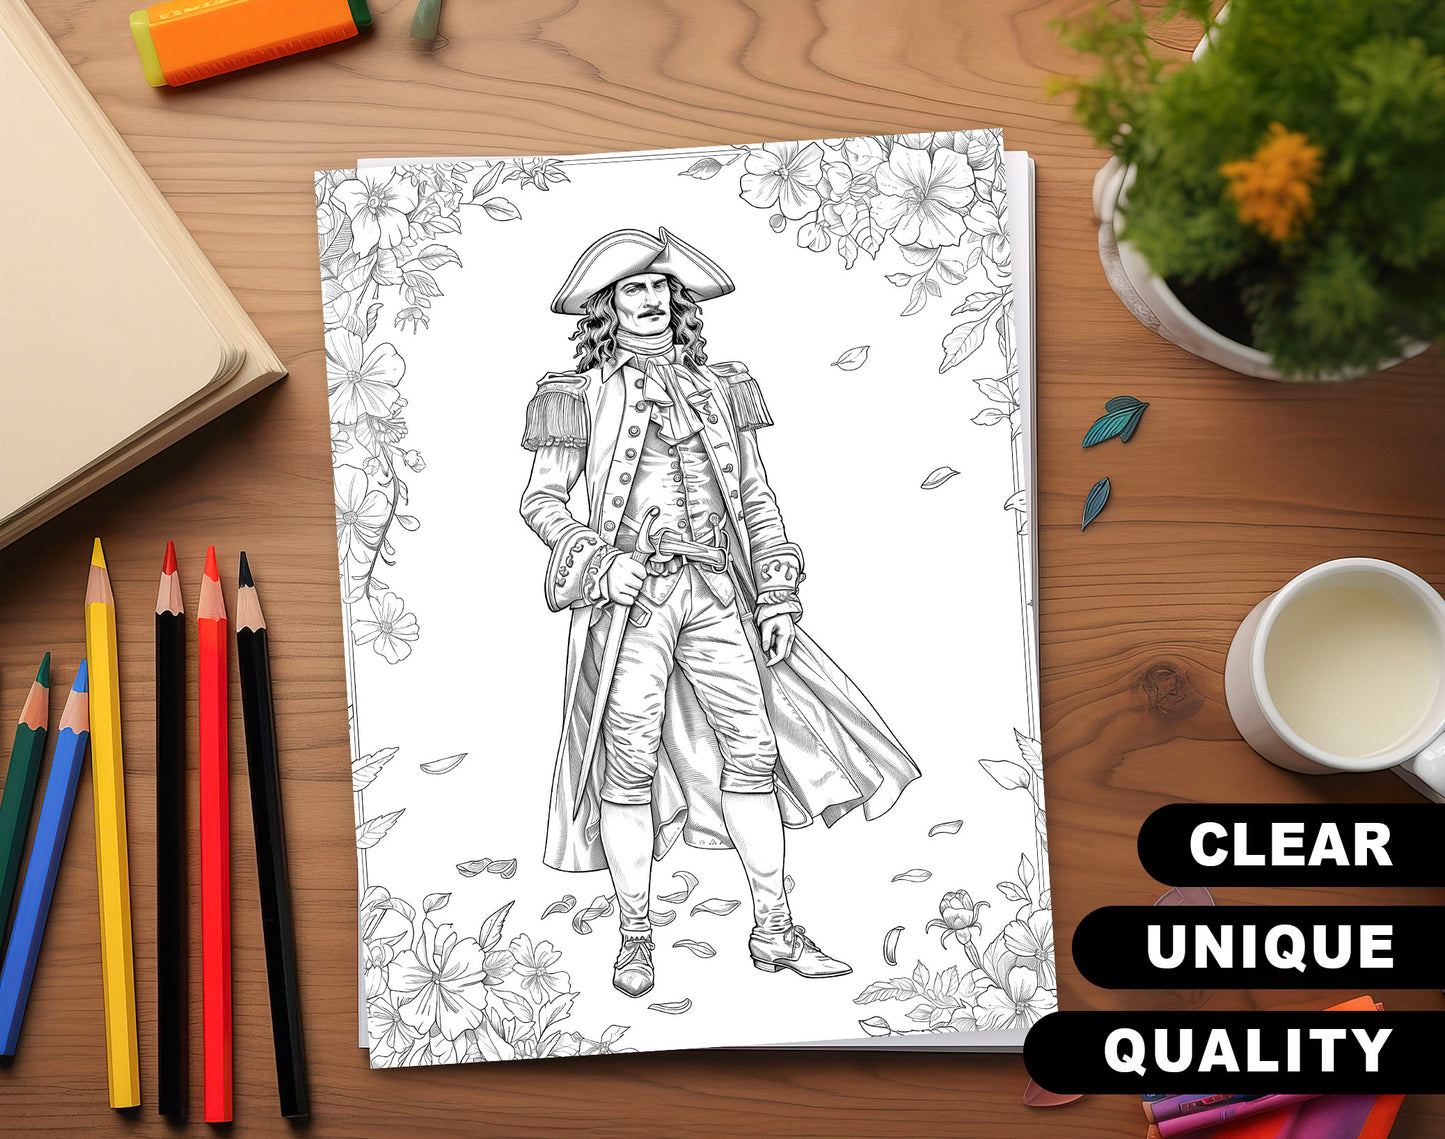 75 Fashion Through Ages Coloring Pages - Instant Download - Printable PDF